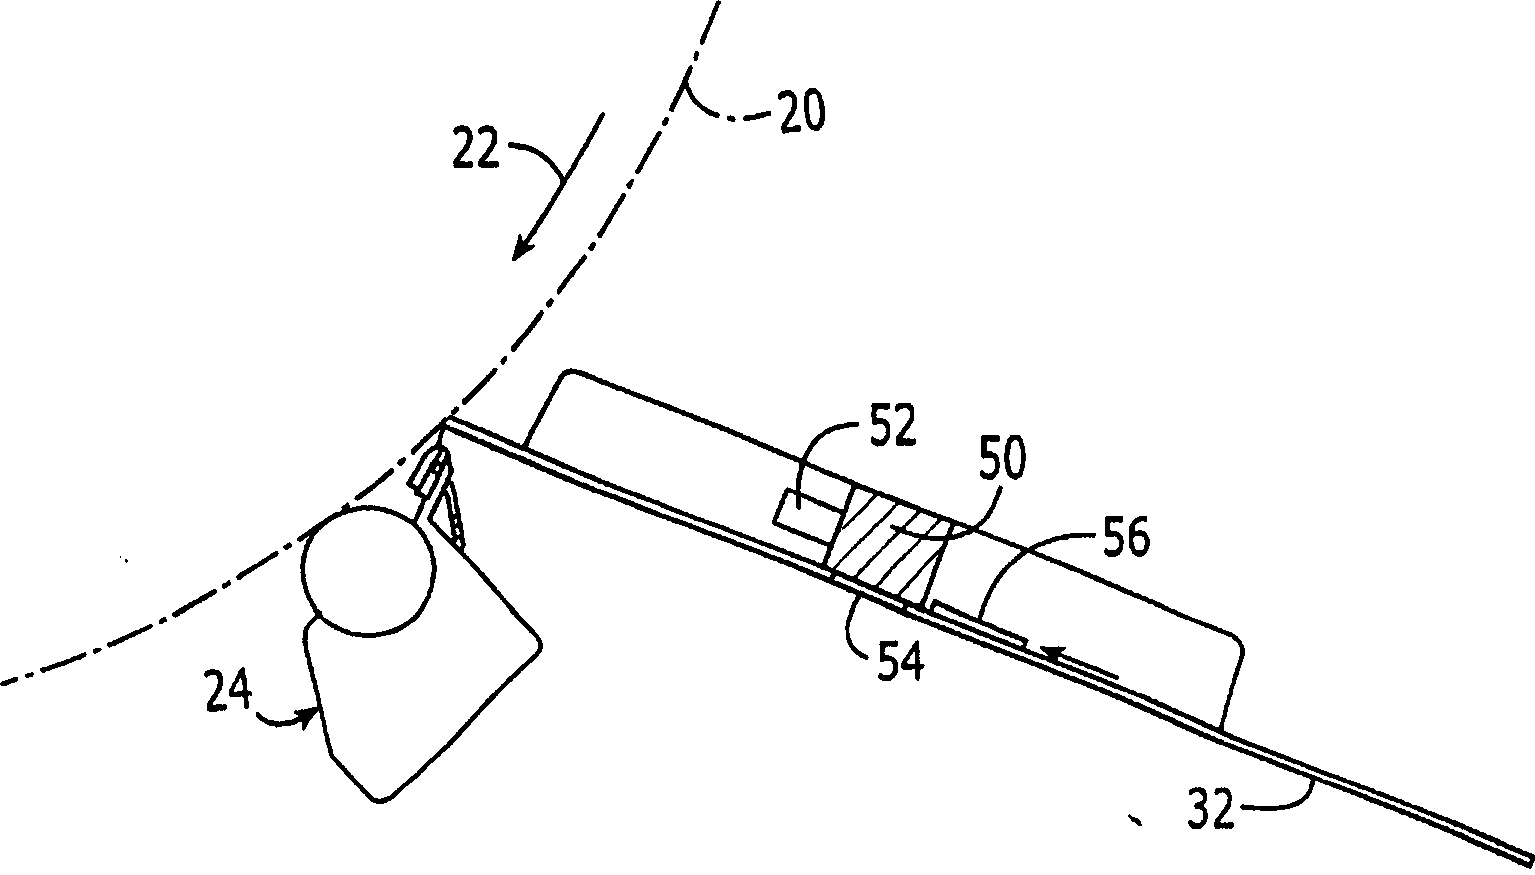 Measuring arrangements in a shortened dry end of a tissue machine